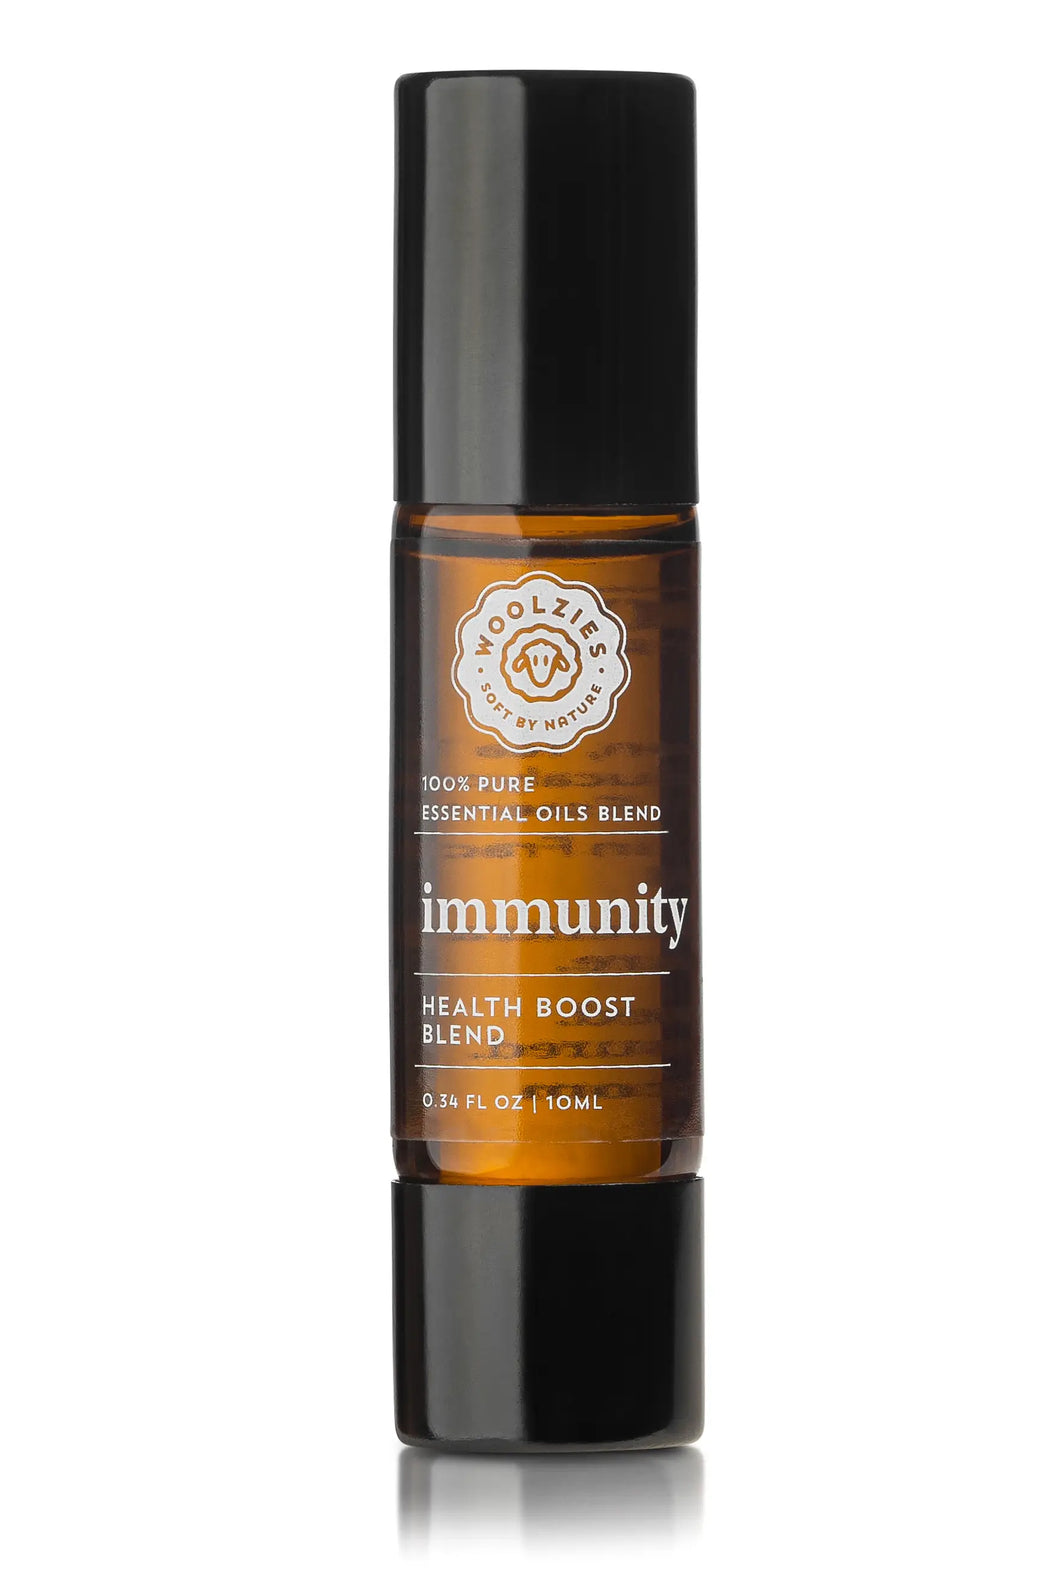 Immunity Double Sided Roll-on Blend